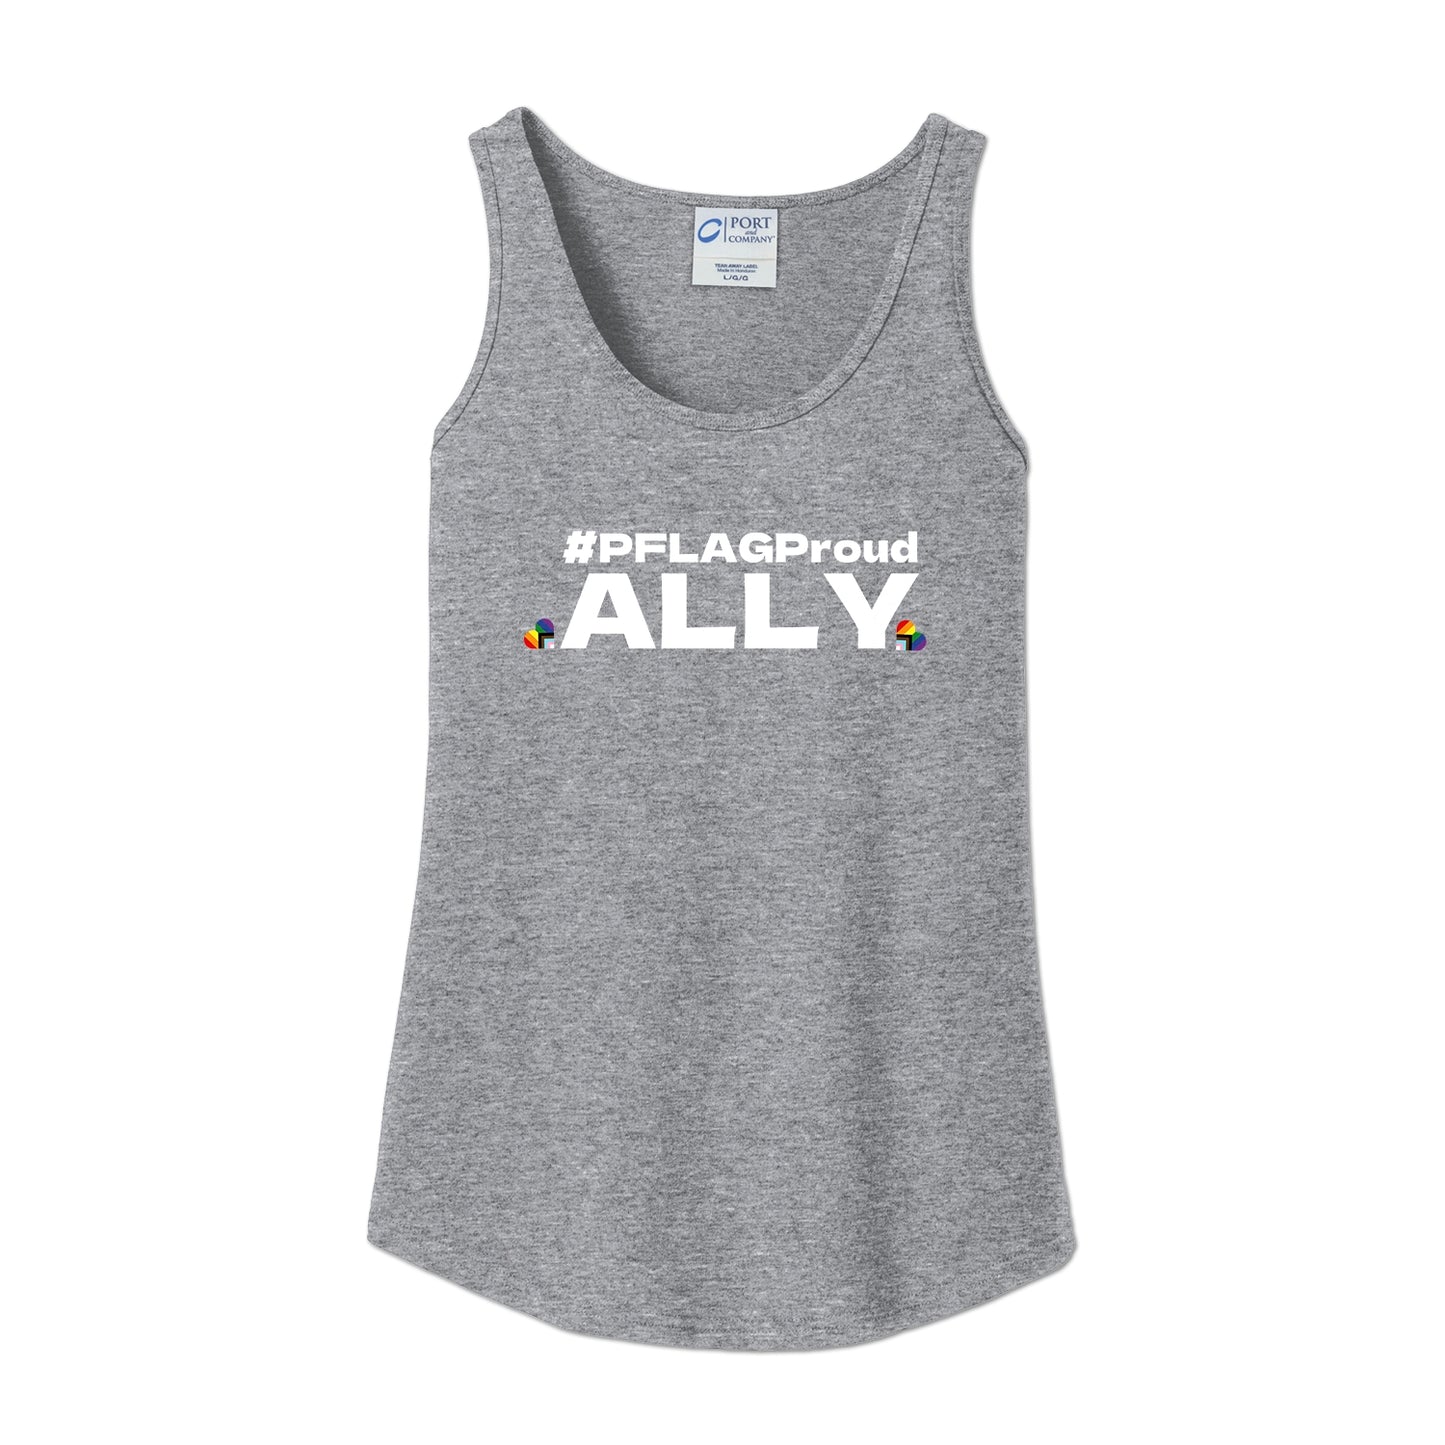 #PFLAGProud Ally - Fitted-Cut Tank Top